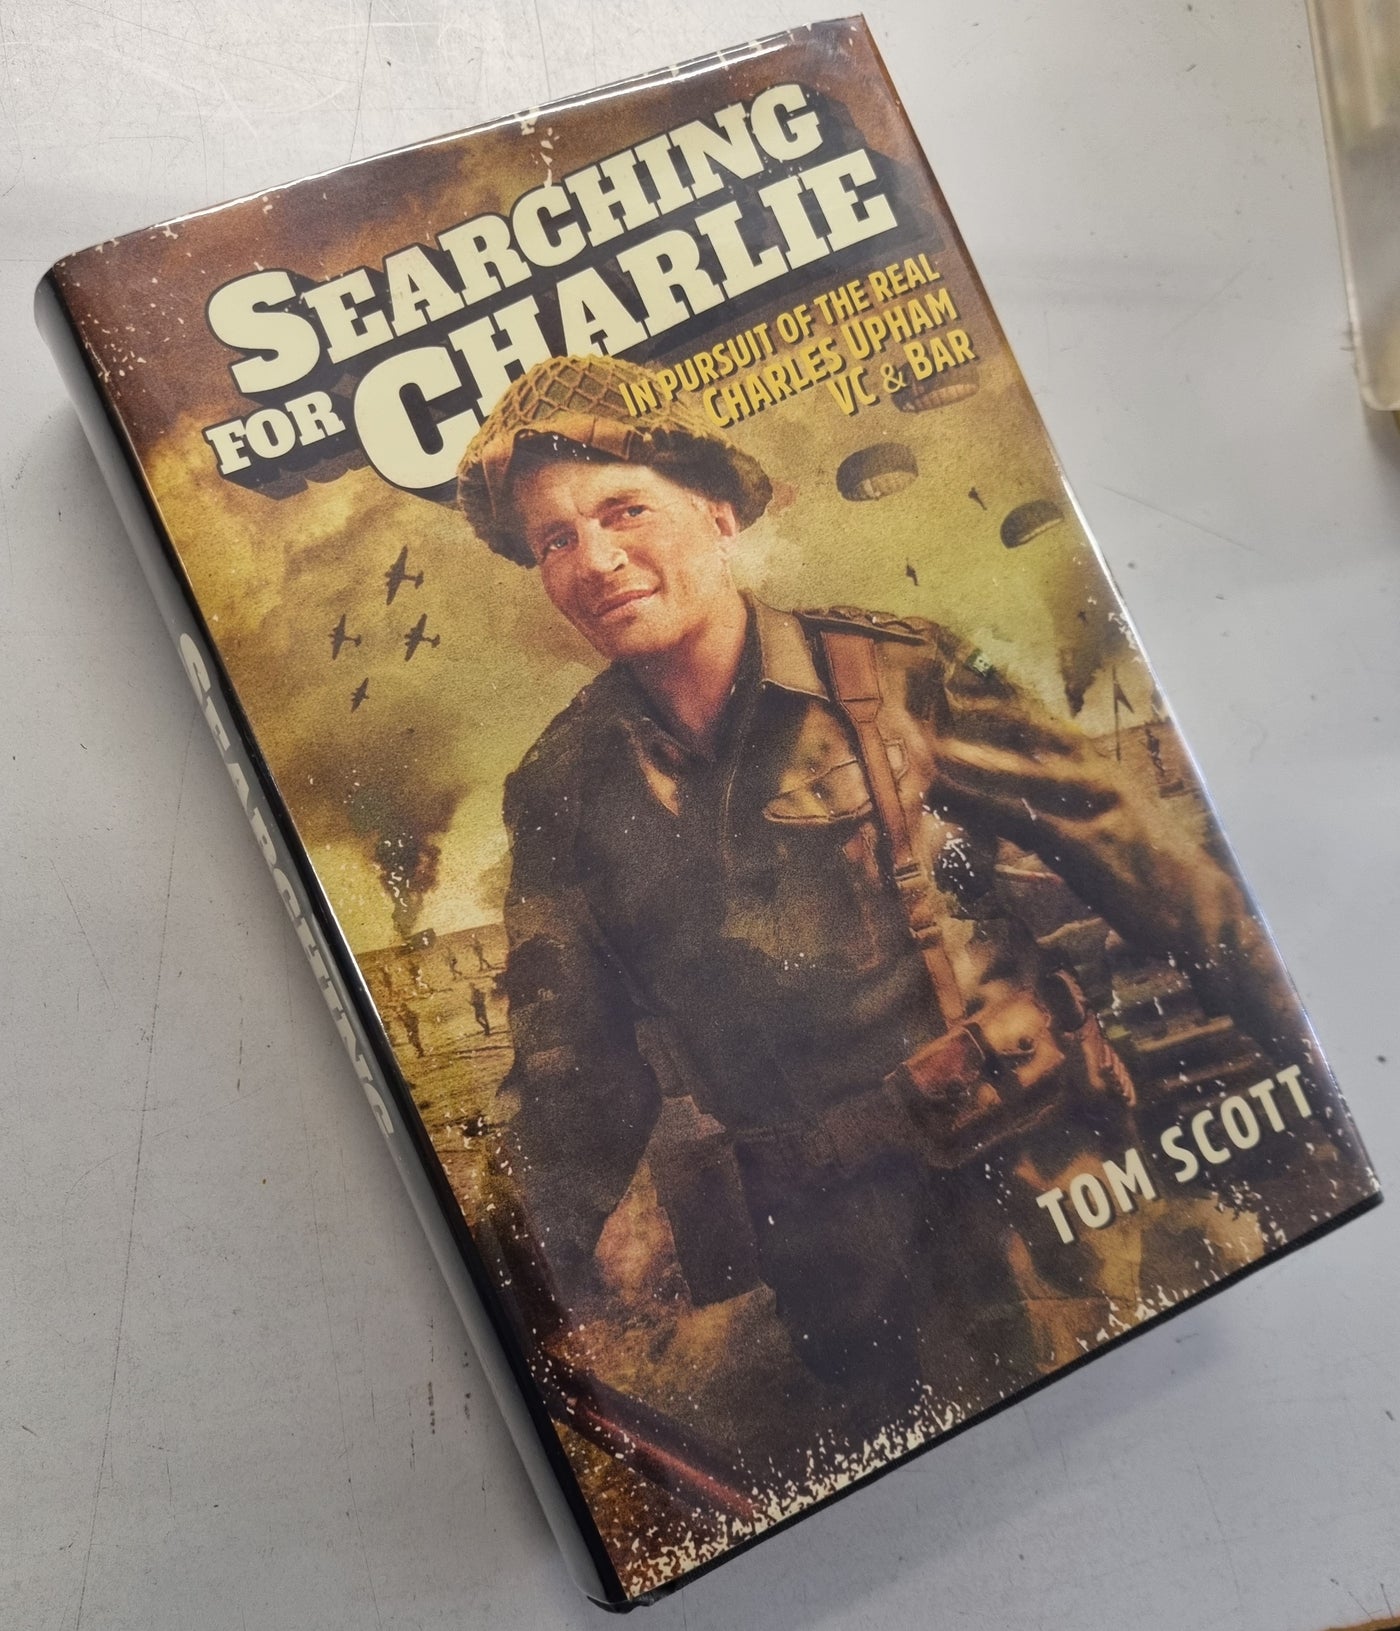 Searching for Charlie: In Pursuit of the Real Charles Upham VC & Bar